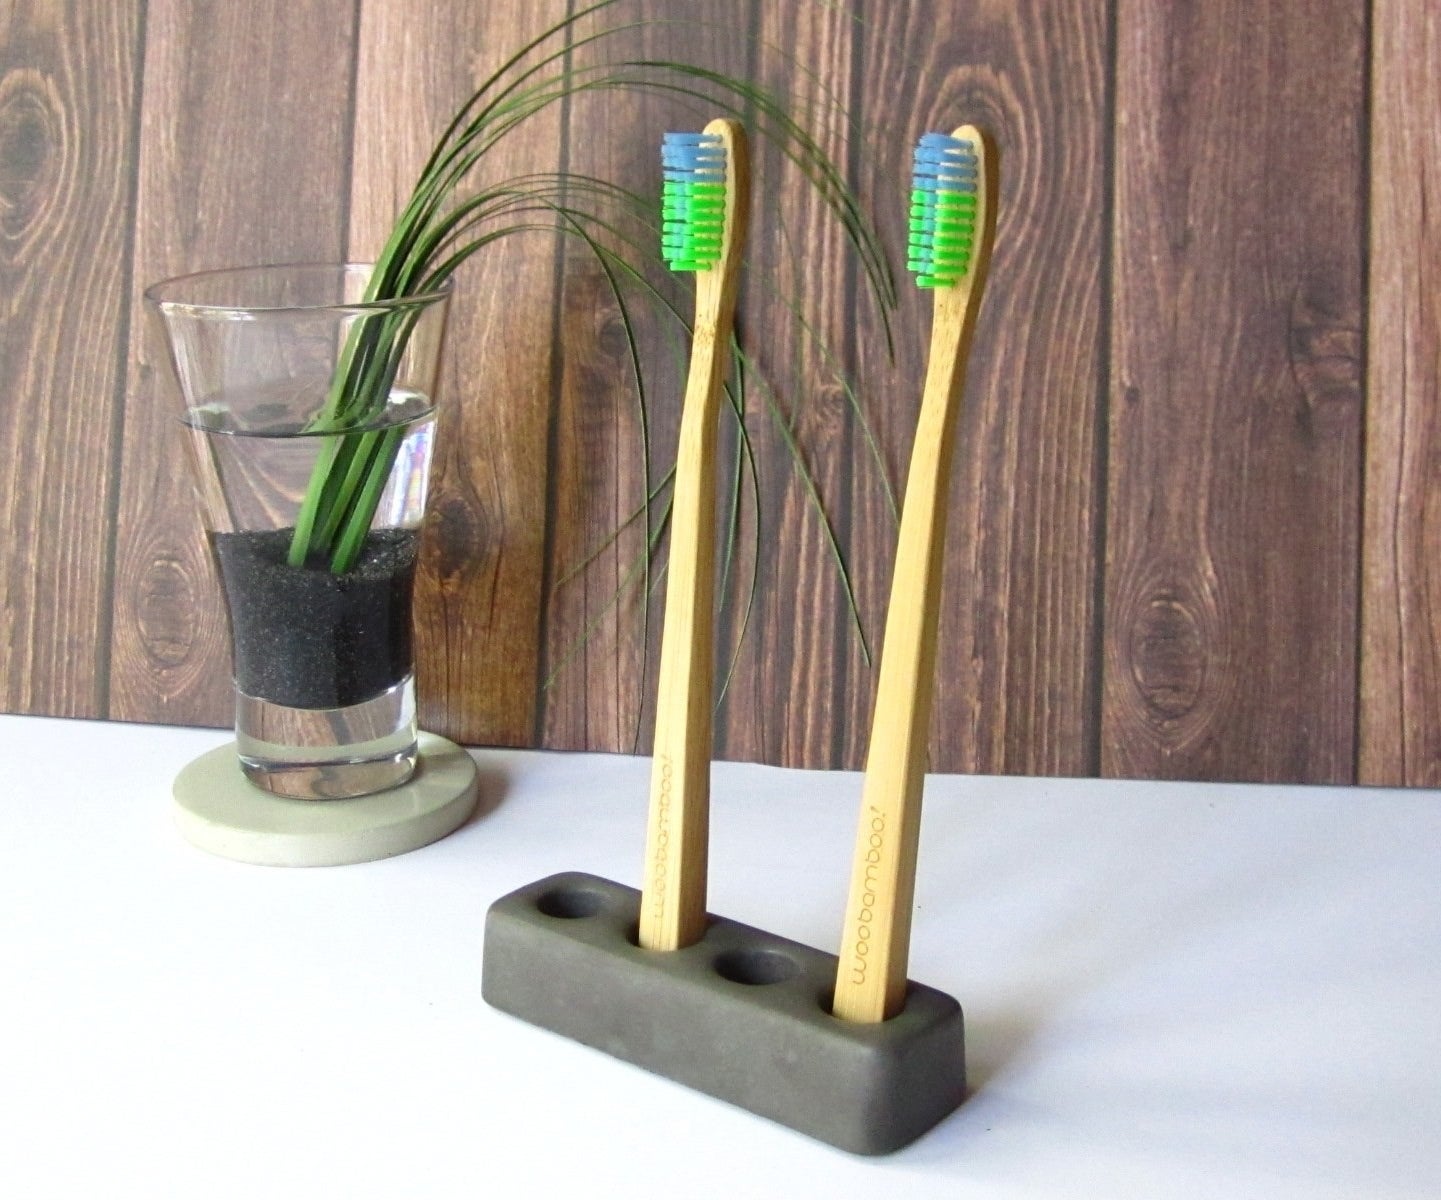 Cement toothbrush holder with room for four brushes holds two wooden toothbrushes on a bathroom countertop.